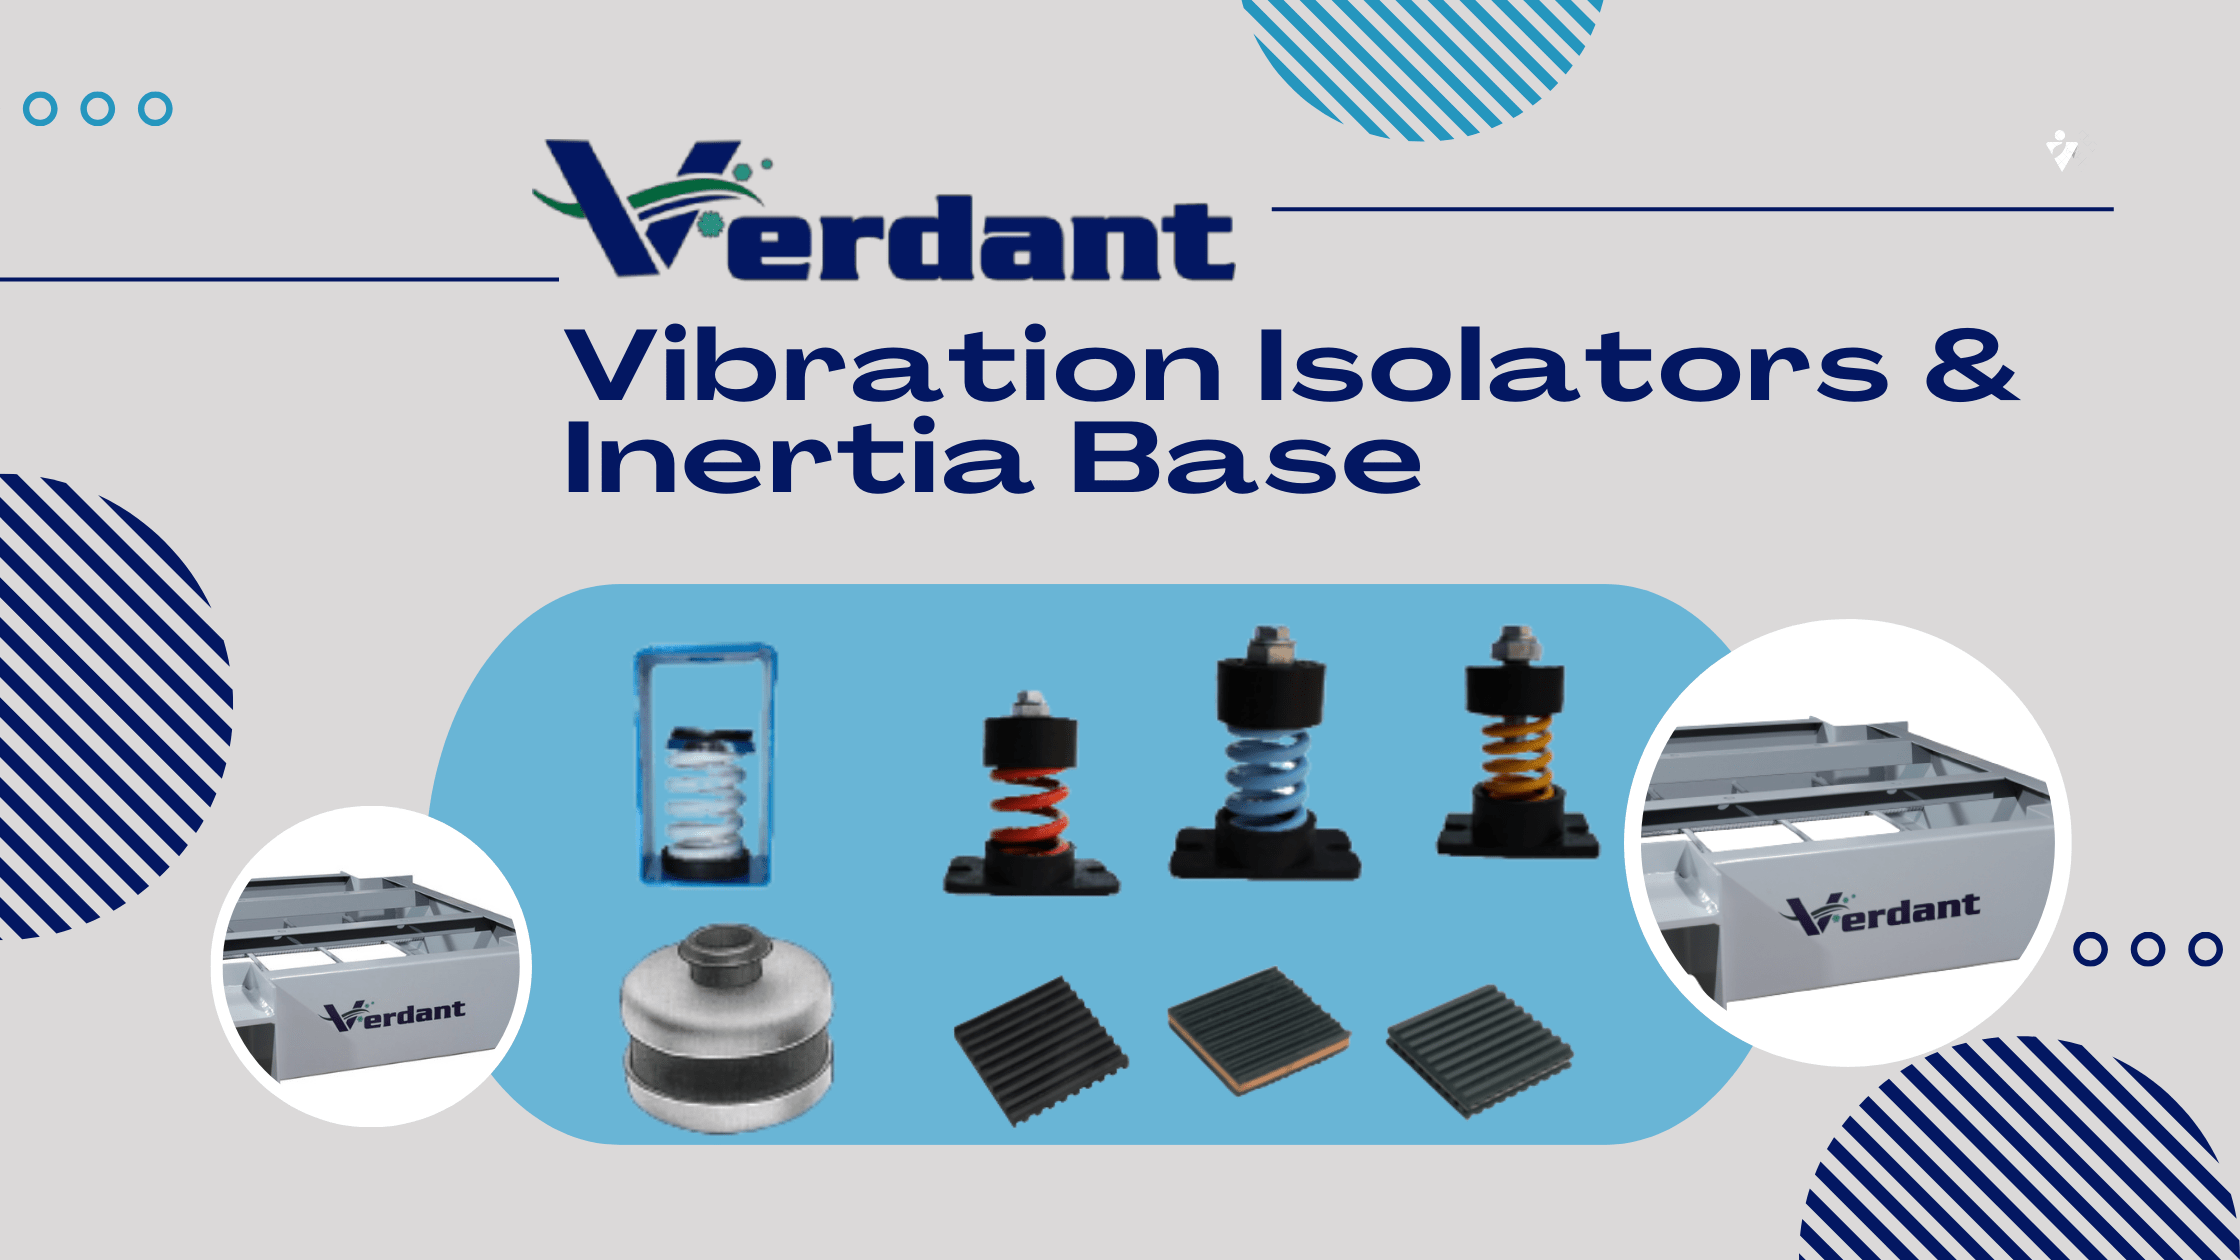 vibration isolators and inertia base manufactured by verdant industries.